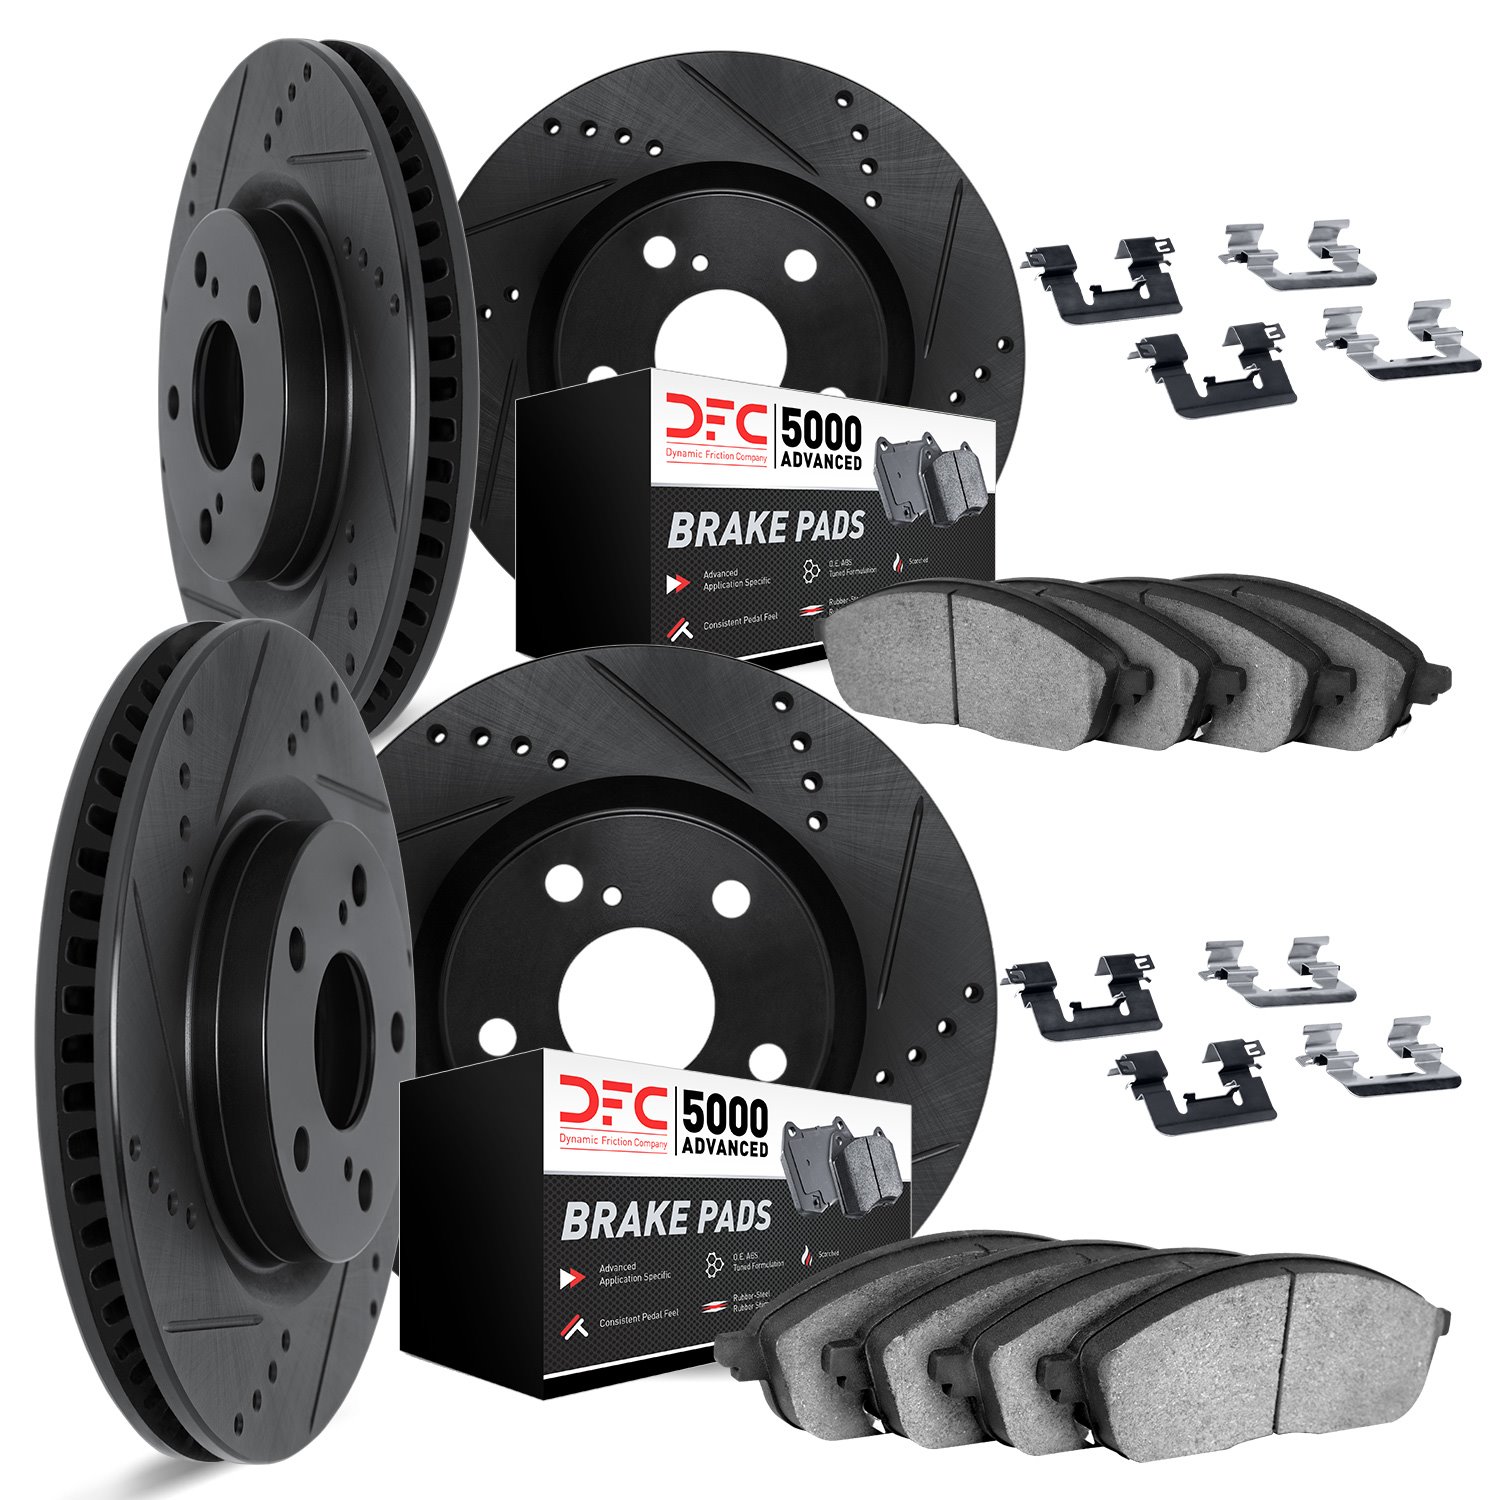 8514-31011 Drilled/Slotted Brake Rotors w/5000 Advanced Brake Pads Kit & Hardware [Black], 2008-2010 BMW, Position: Front and Re